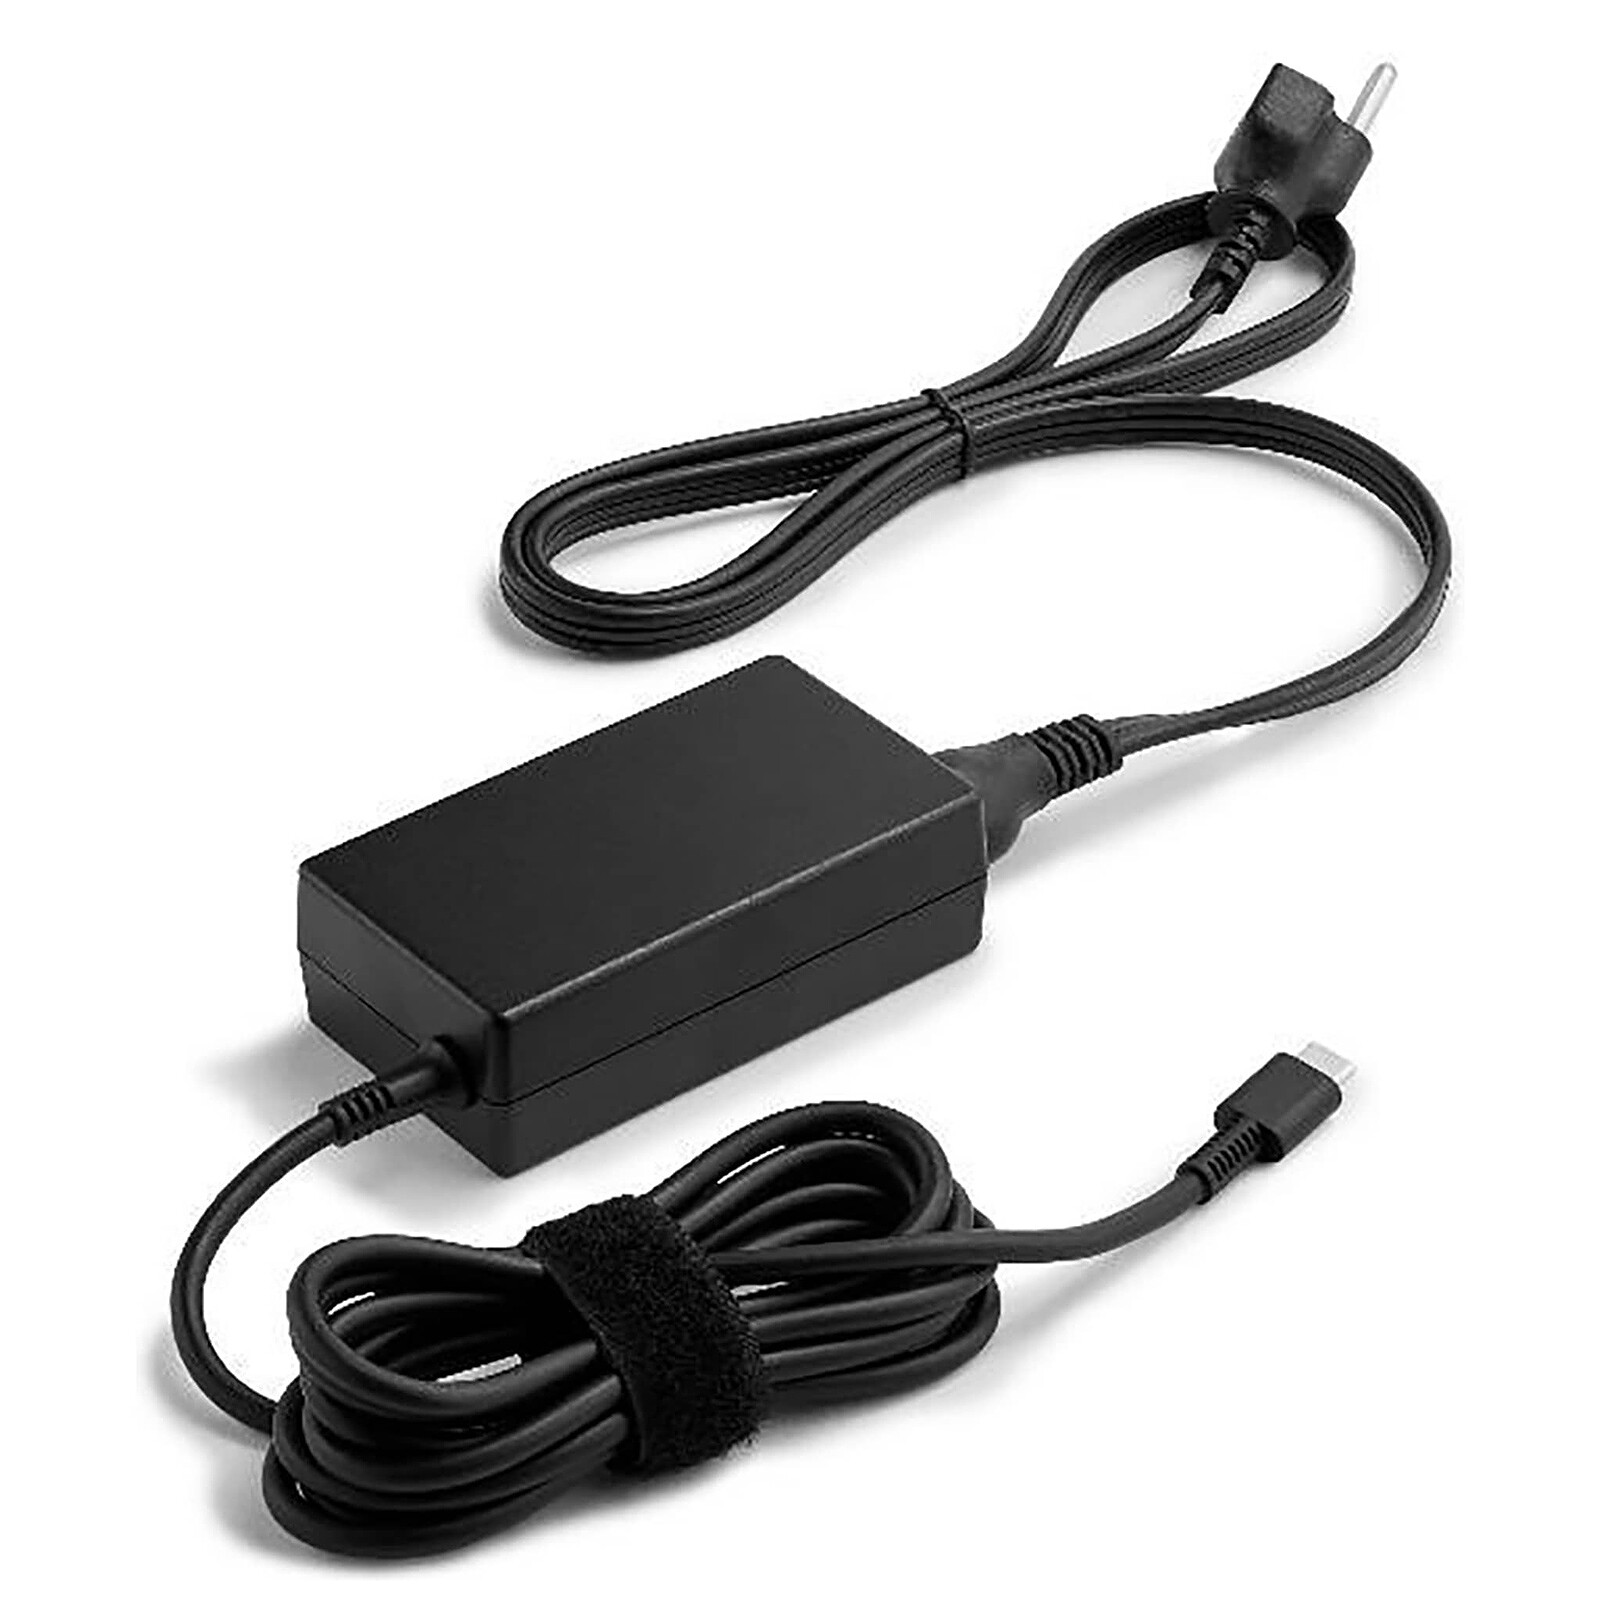 ASUS 65W USB-C Power Adapter (0A001-00443300) - Laptop charger